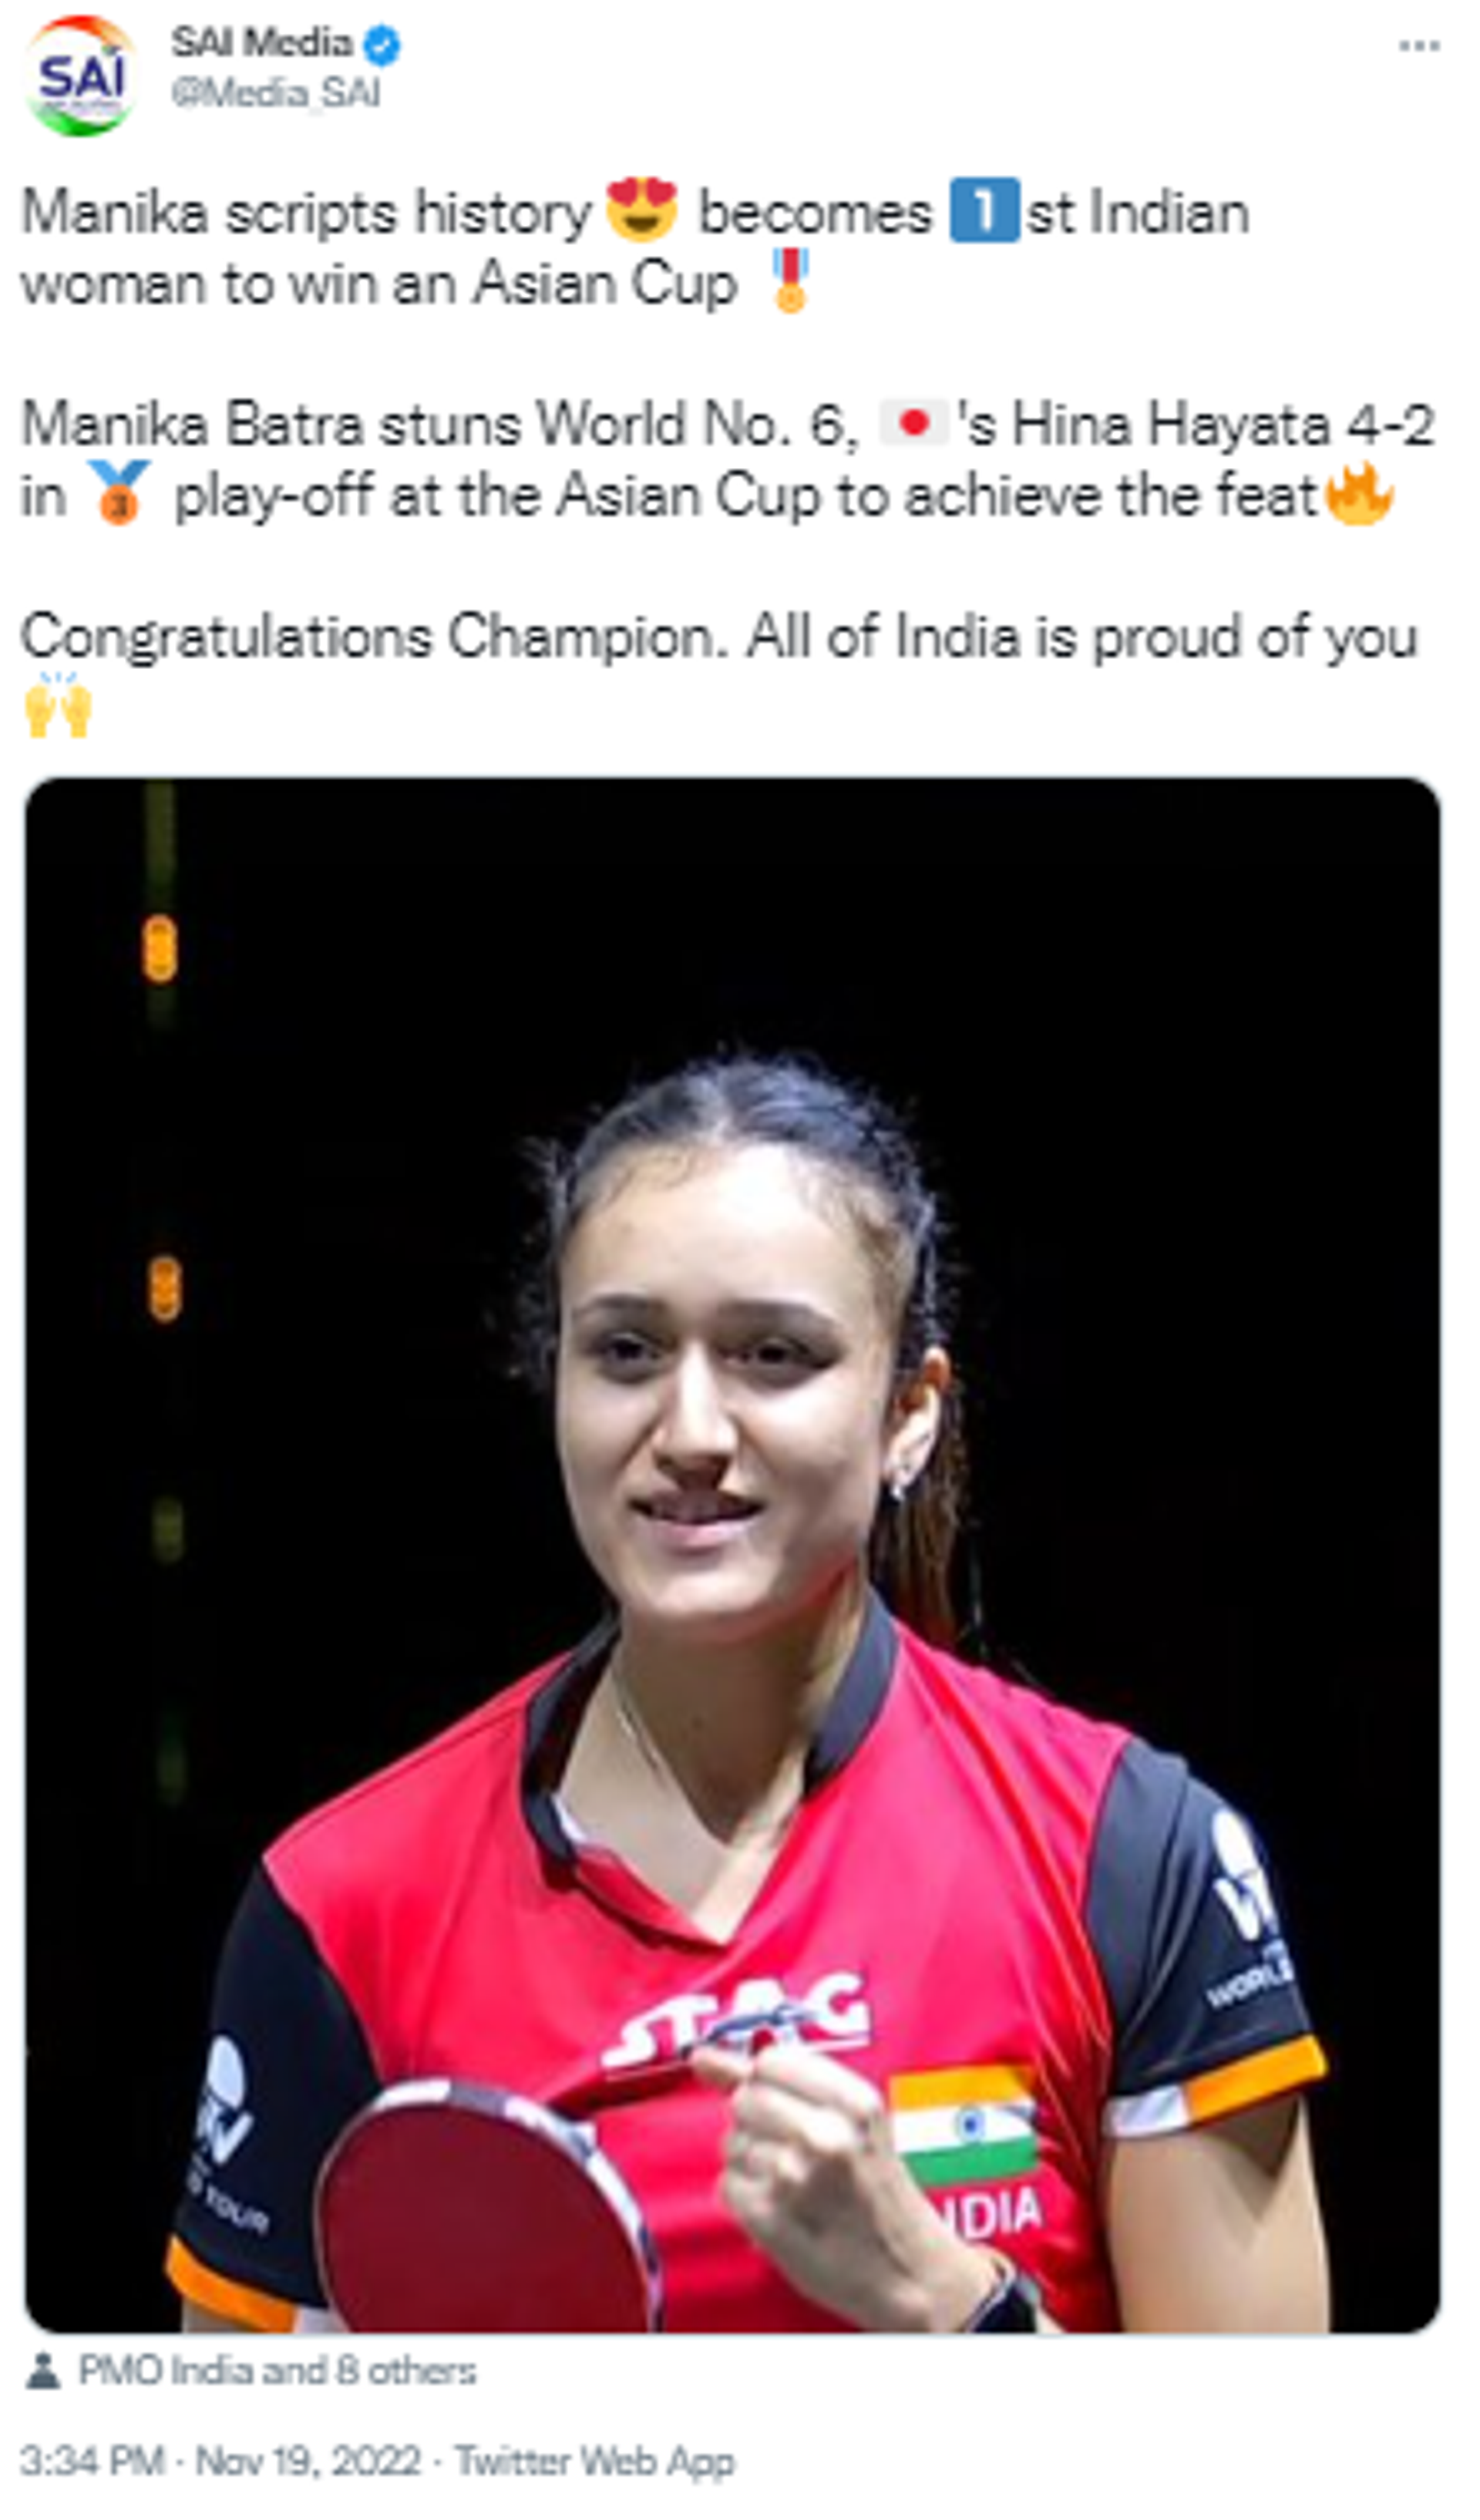 Manika Batra Scripts History by Becoming First Indian Woman to Win Bronze Medal in Asian Cup - Sputnik International, 1920, 19.11.2022